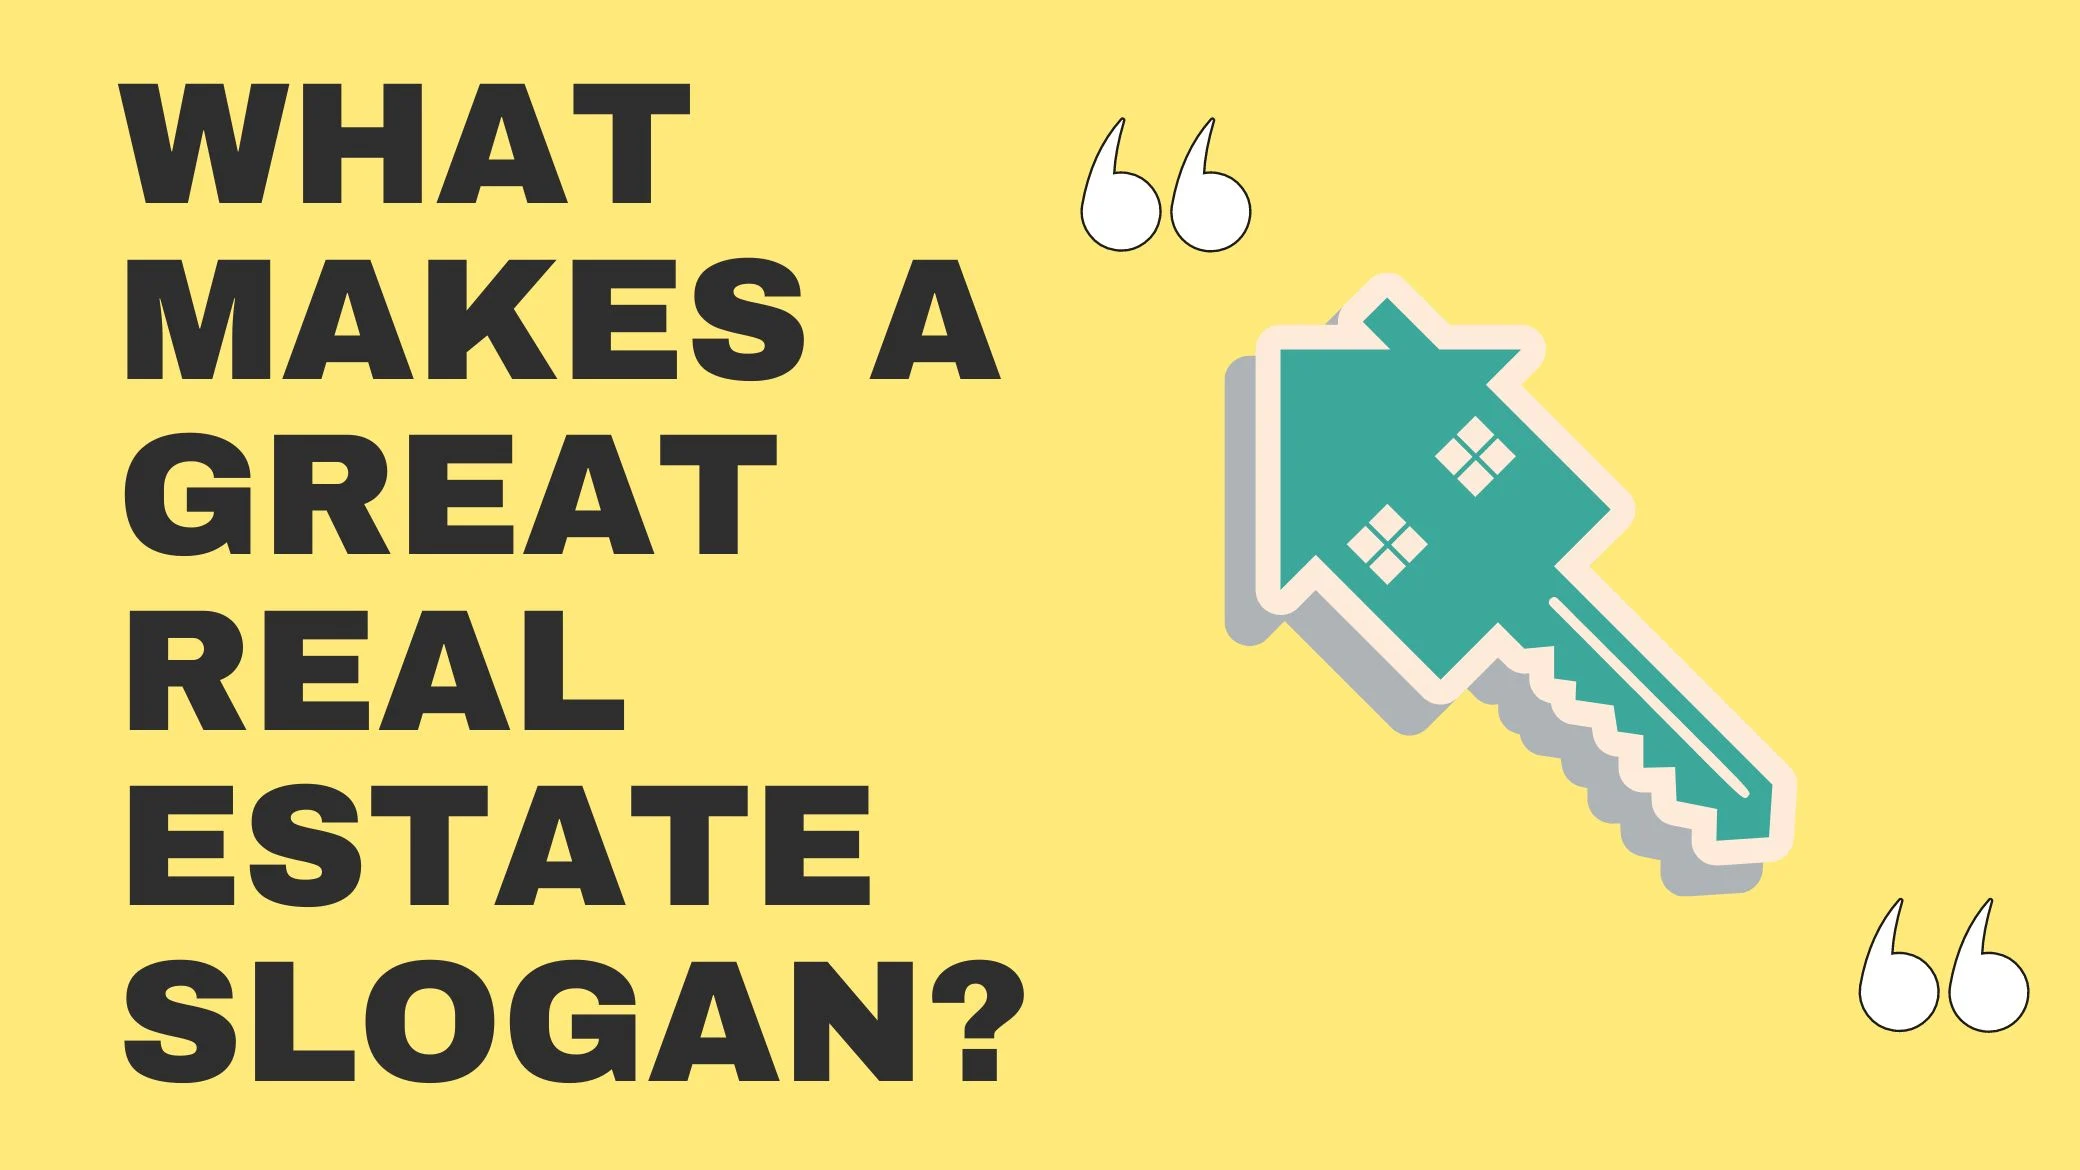 What Makes a Great Real Estate Slogan?